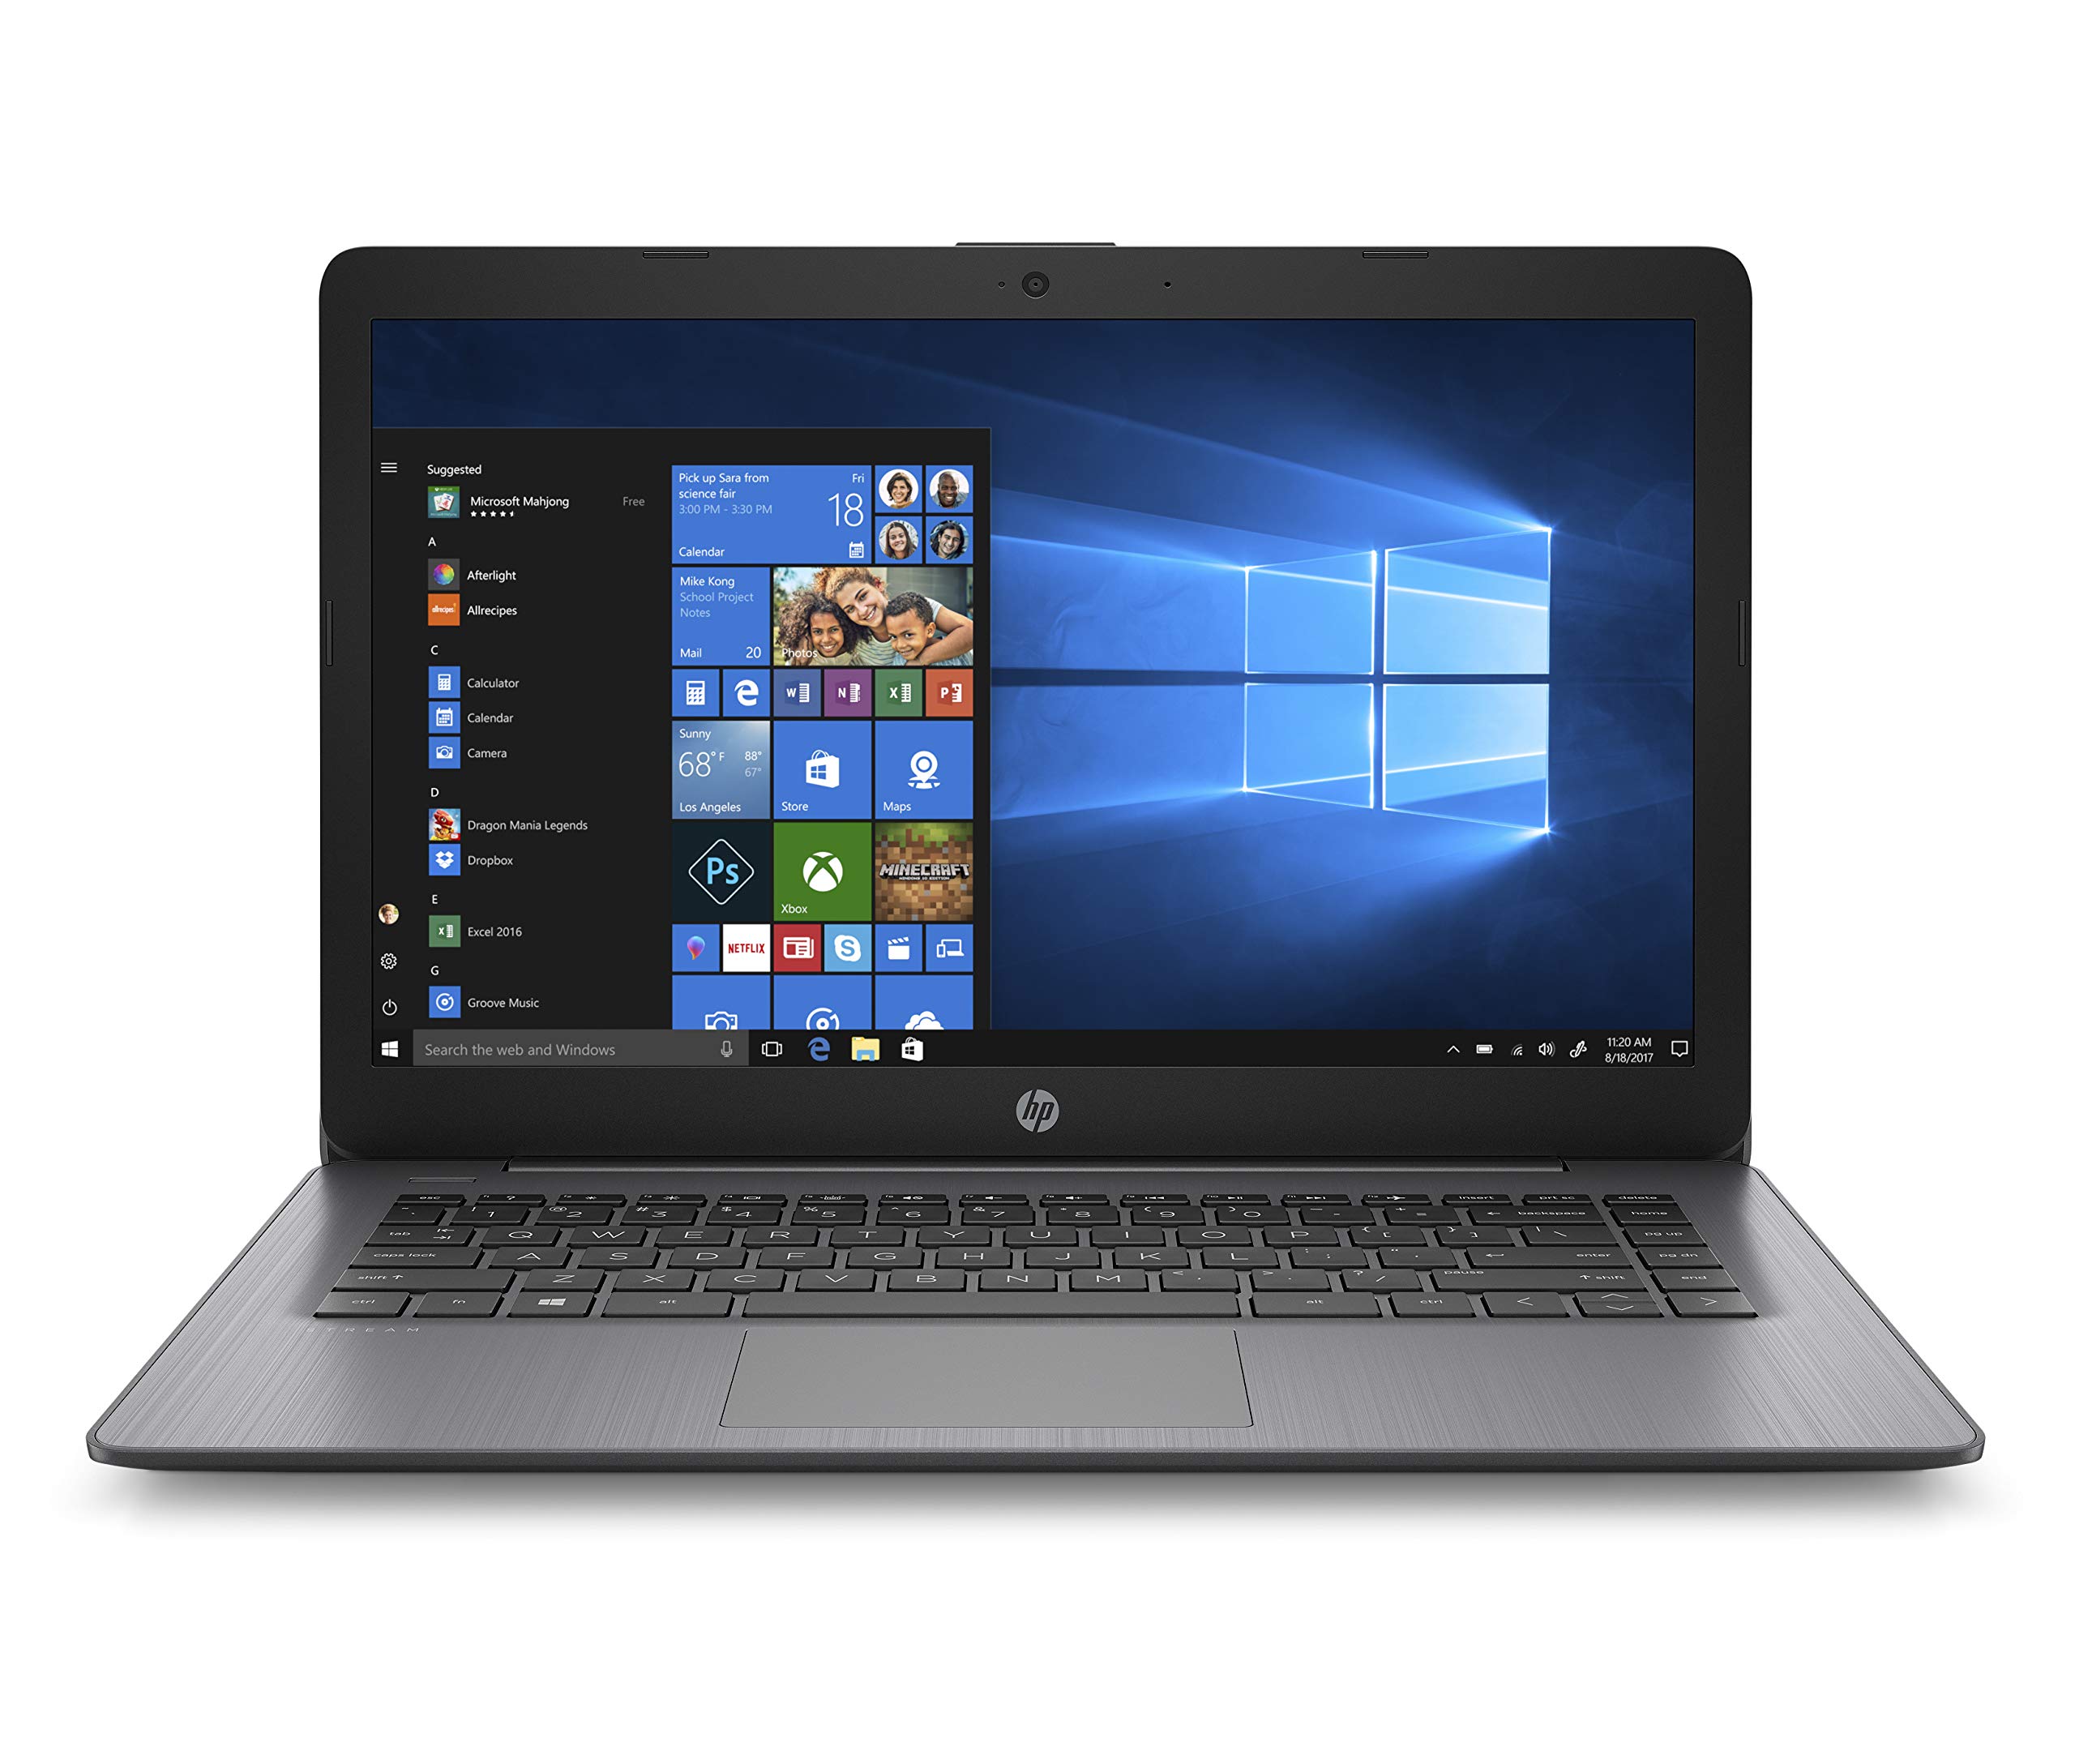 HP Stream 14-Inch Touchscreen Laptop, AMD Dual-Core A4-9120E Processor, 4 GB SDRAM, 64 GB eMMC, Windows 10 Home in S Mode with Office 365 Personal ...